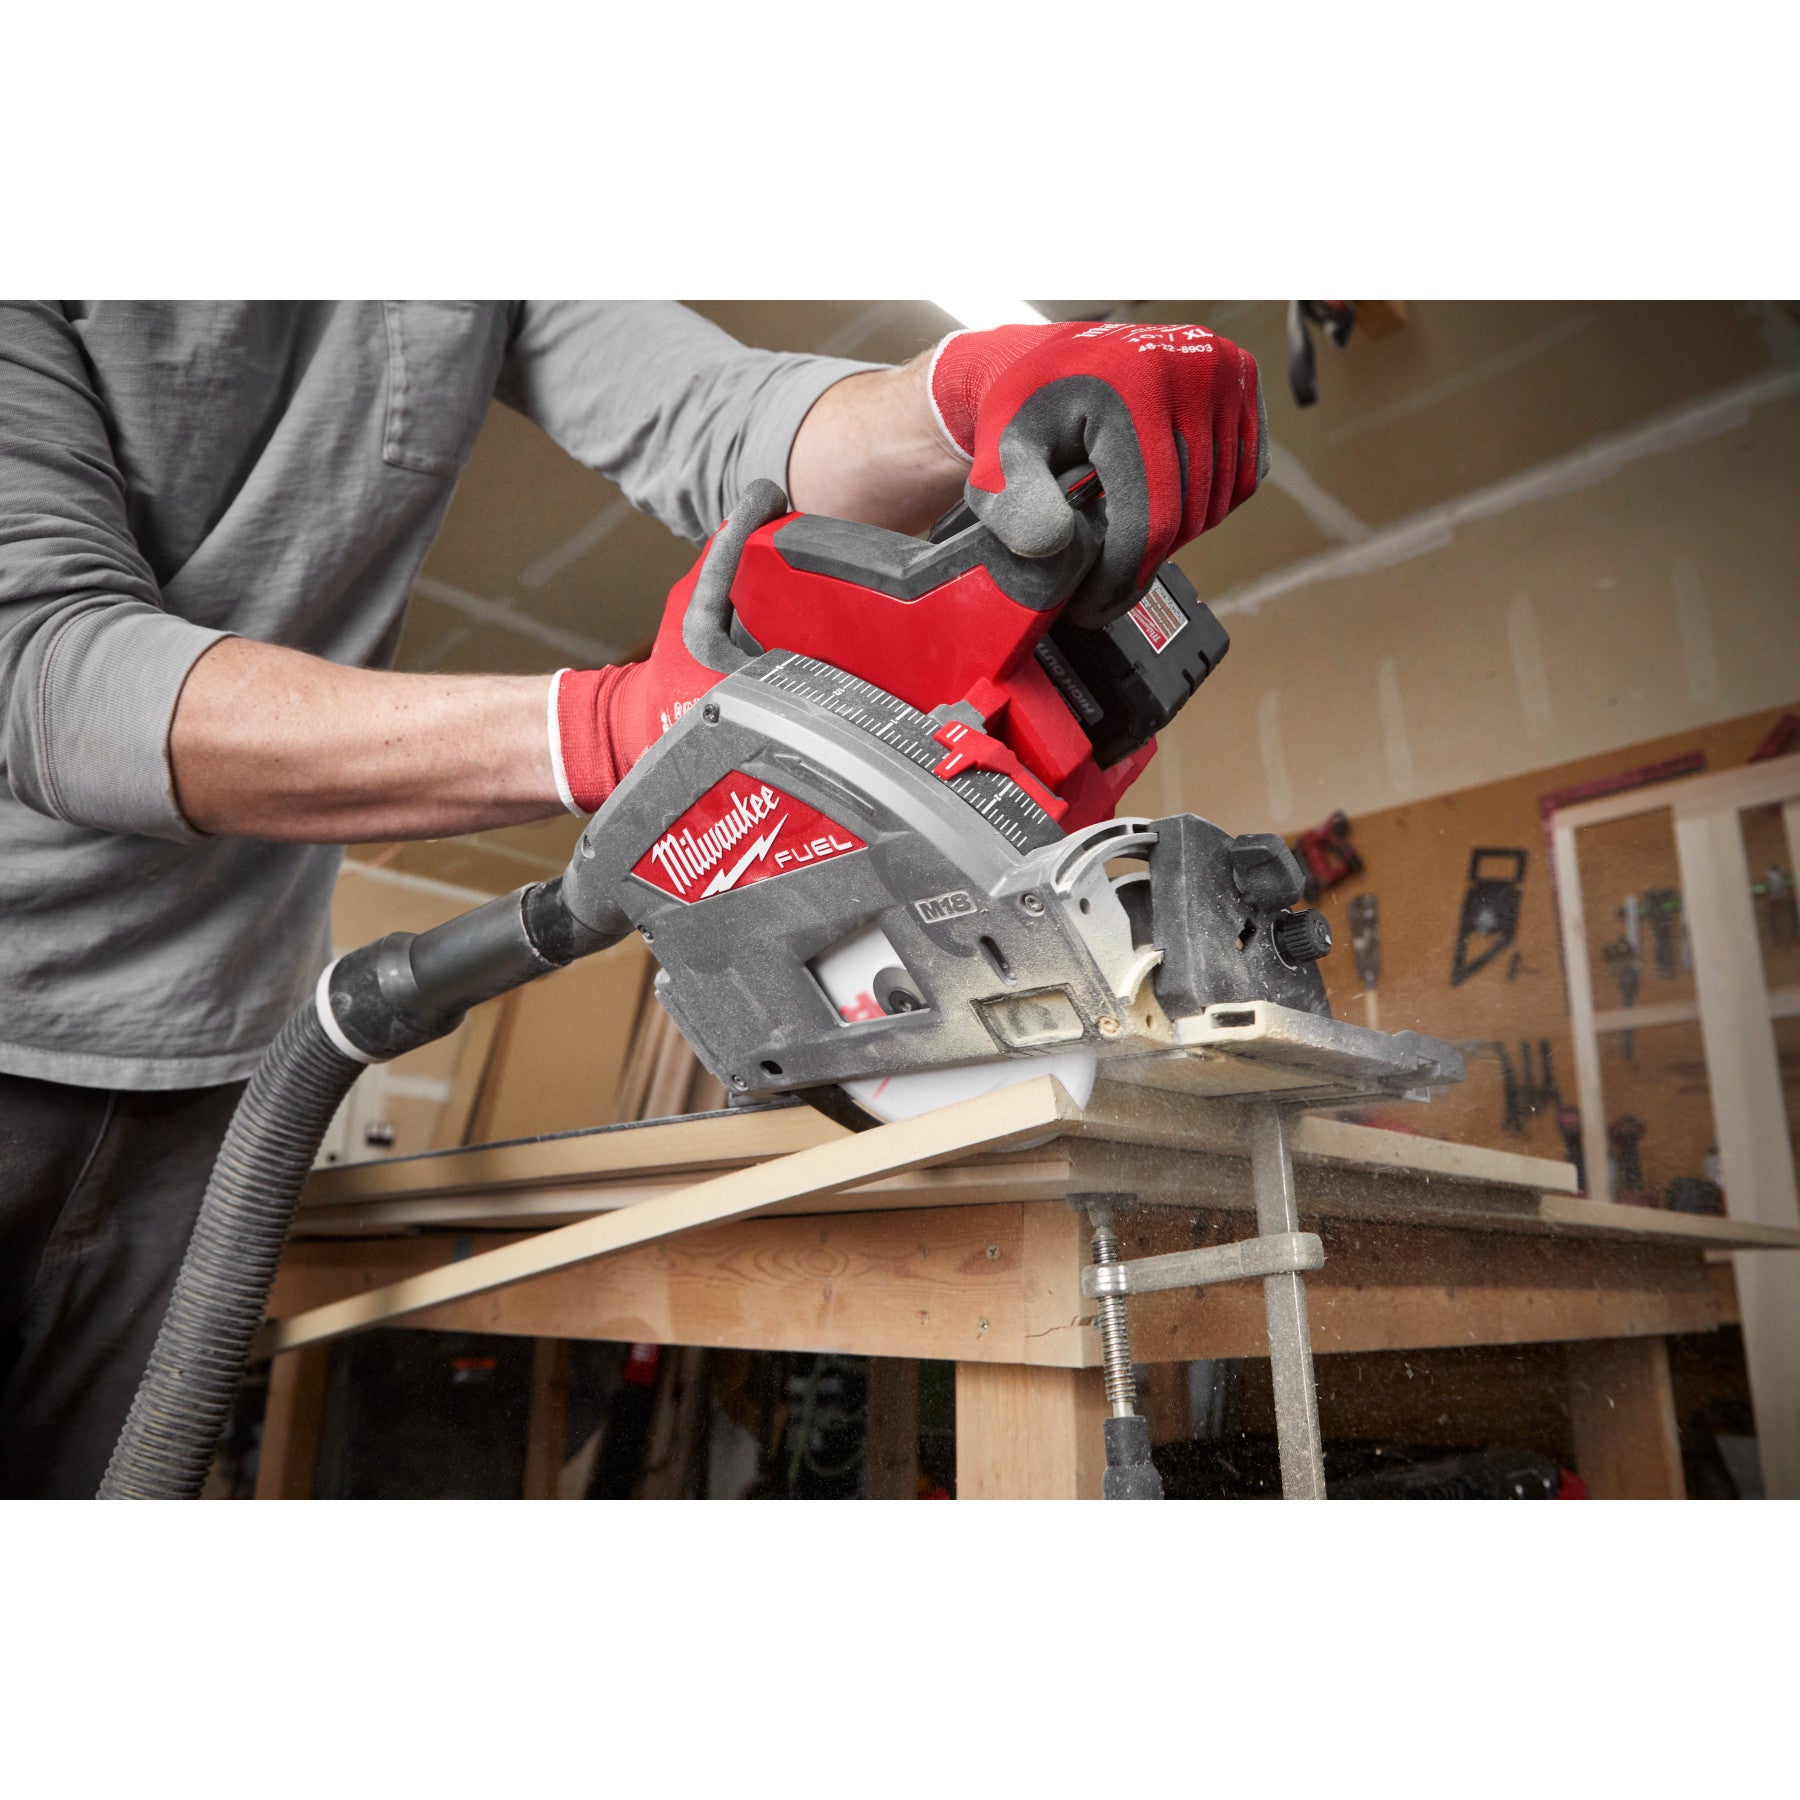 Milwaukee 2831-20 M18 FUEL 6-1/2" Plunge Track Saw (Tool Only)